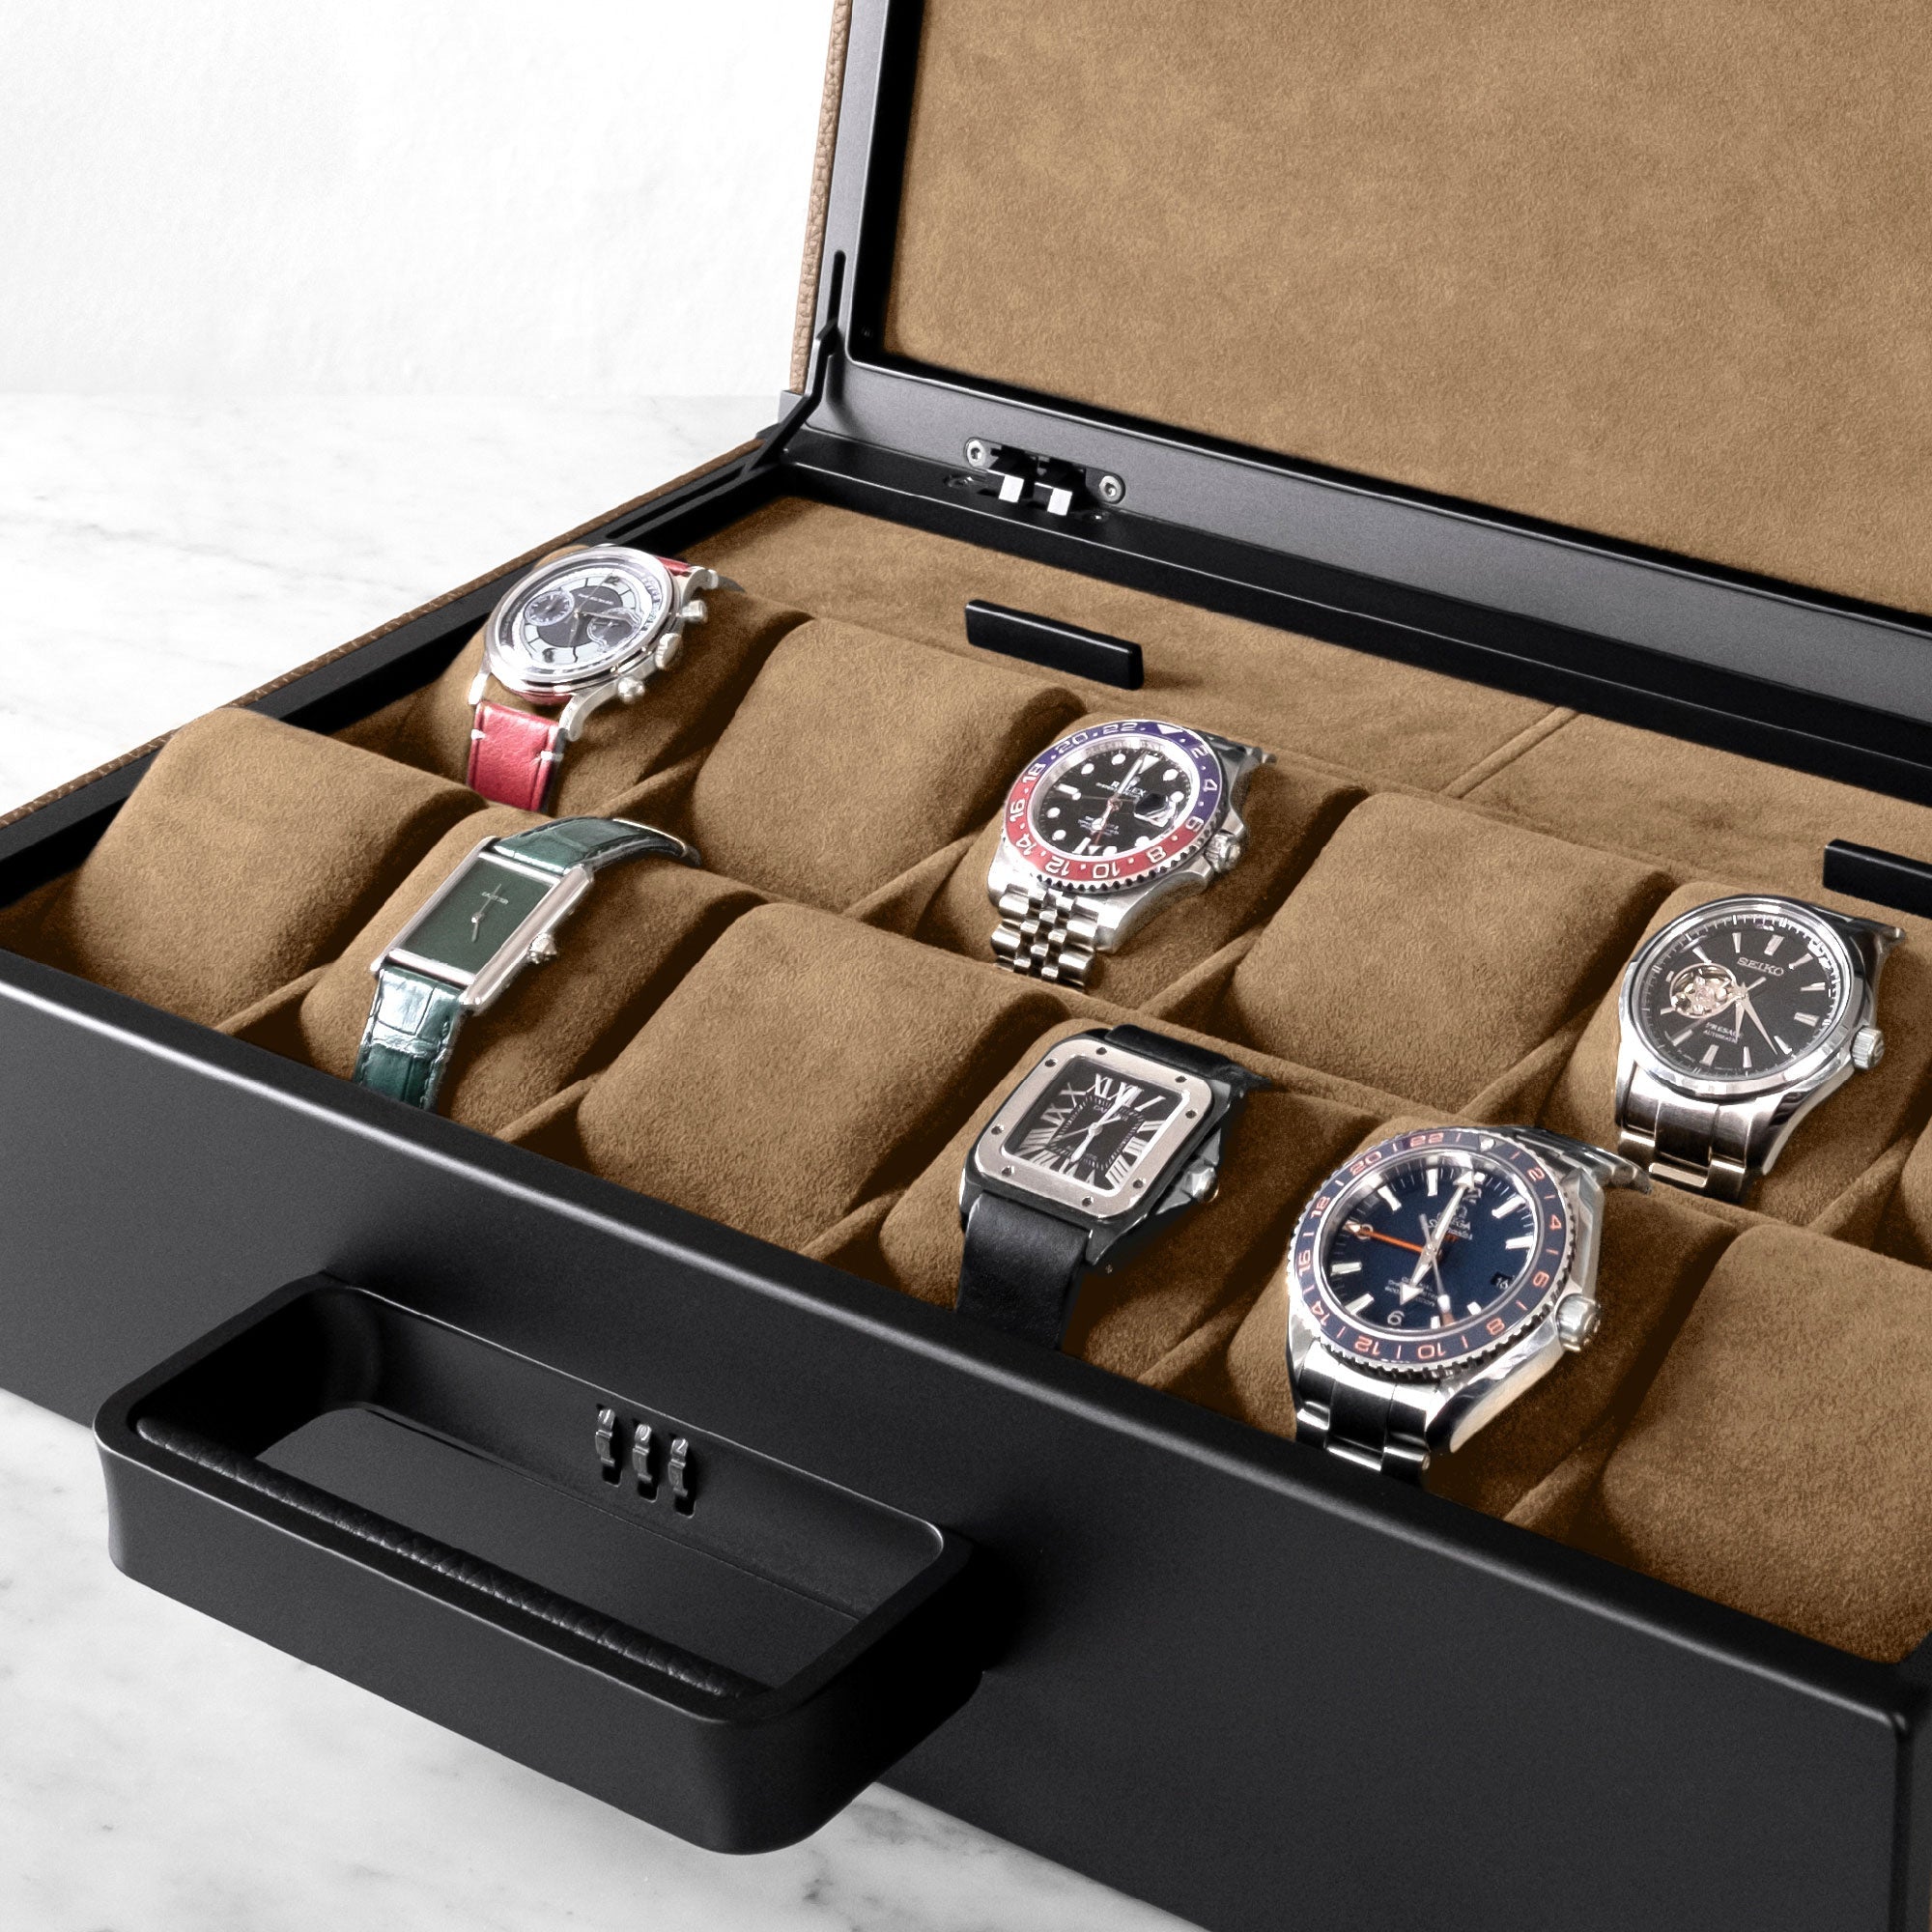 Lifestyle shot of Mackenzie Watch briefcase filled with luxury watches including Rolex, Cartier and Omega